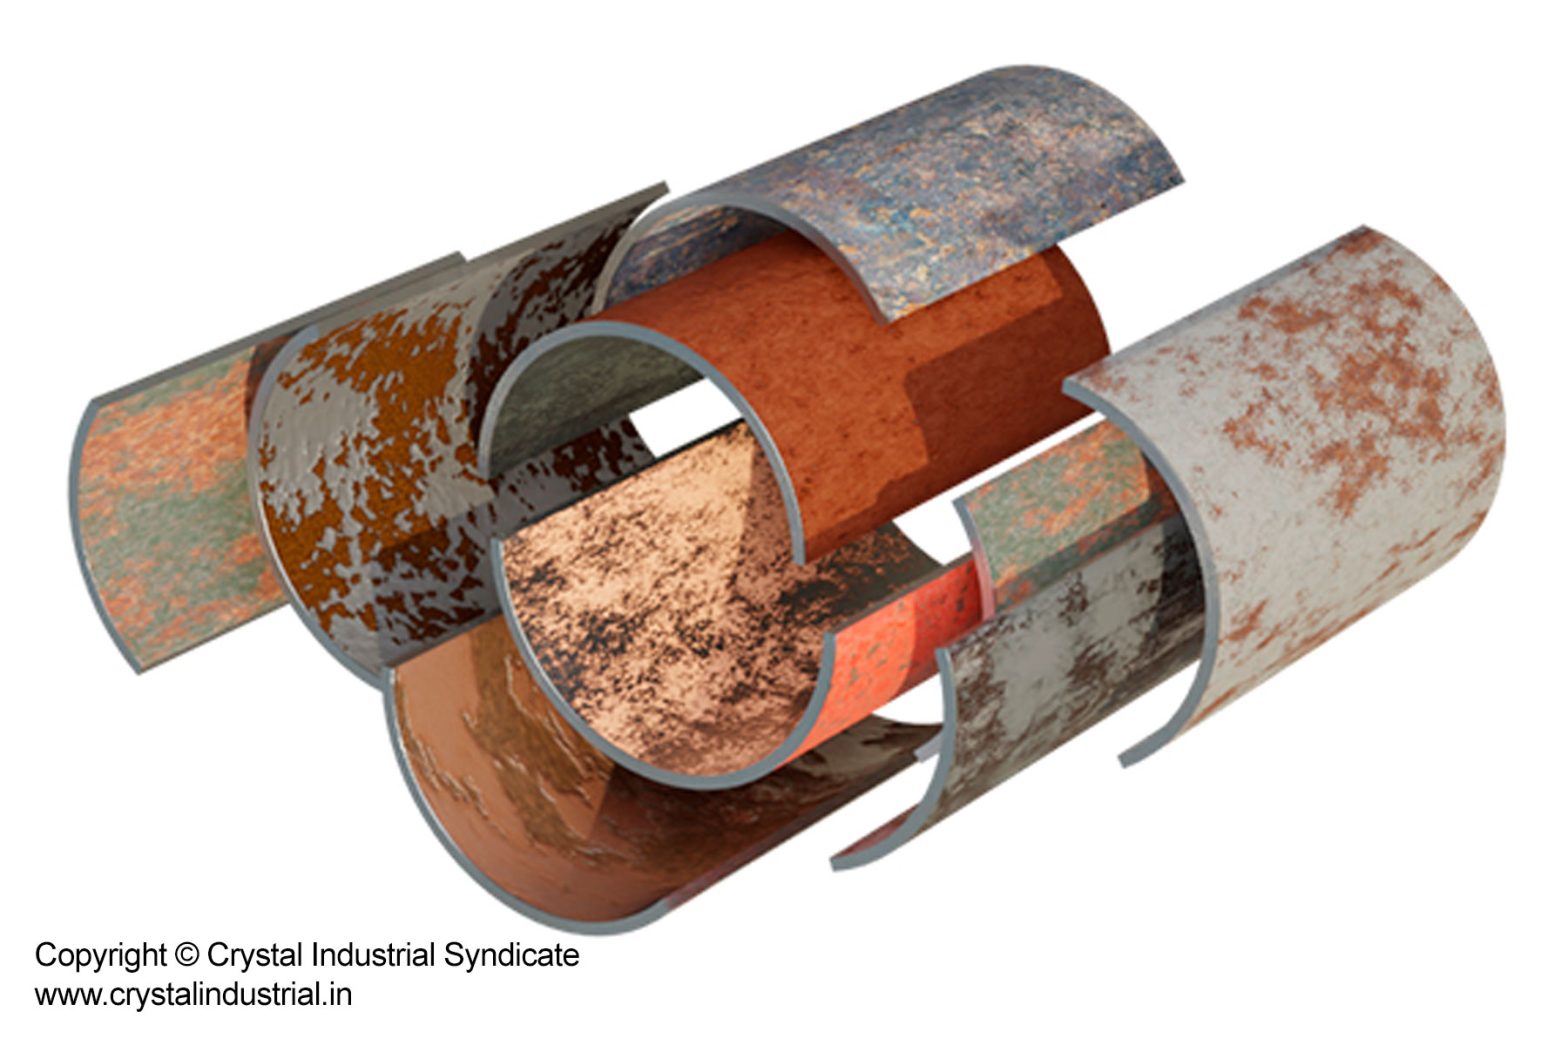 Injection quills protect gas pipelines from corrosion